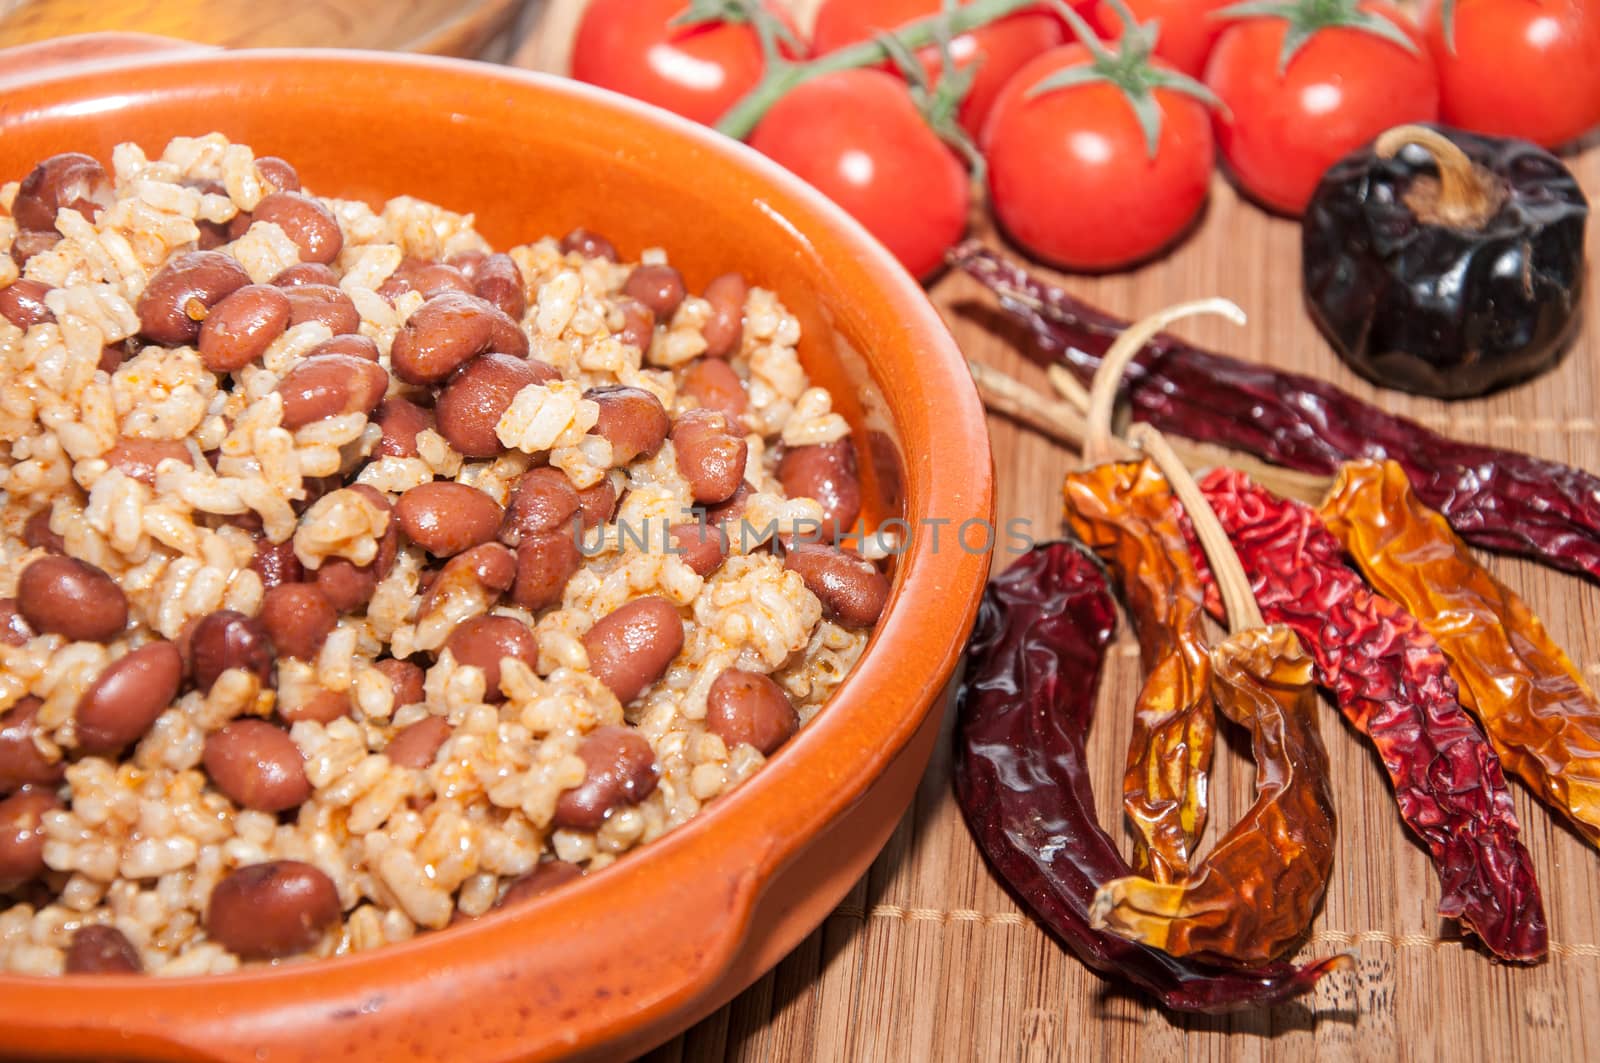 Casserole of beans and rice by Mariamarmar